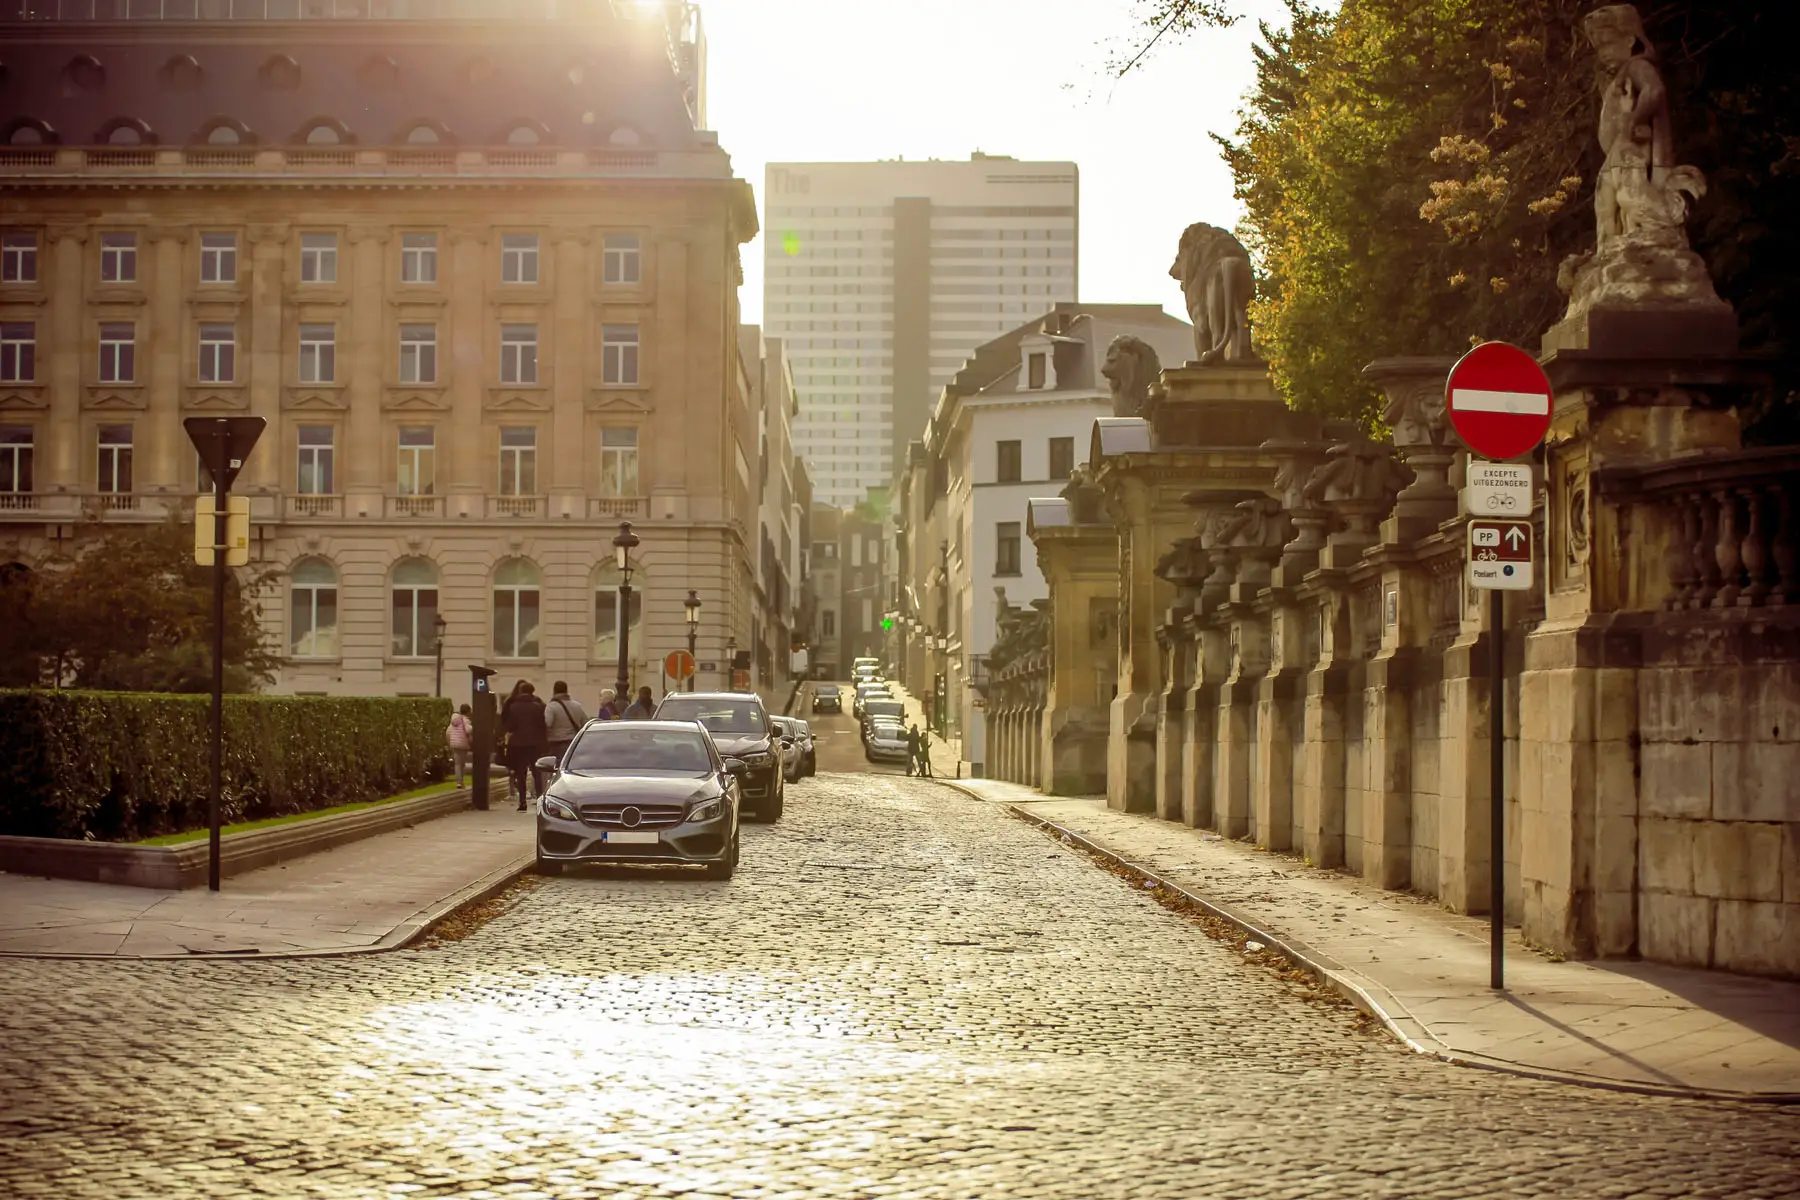 cars parked on a street in Brussels, Belgium